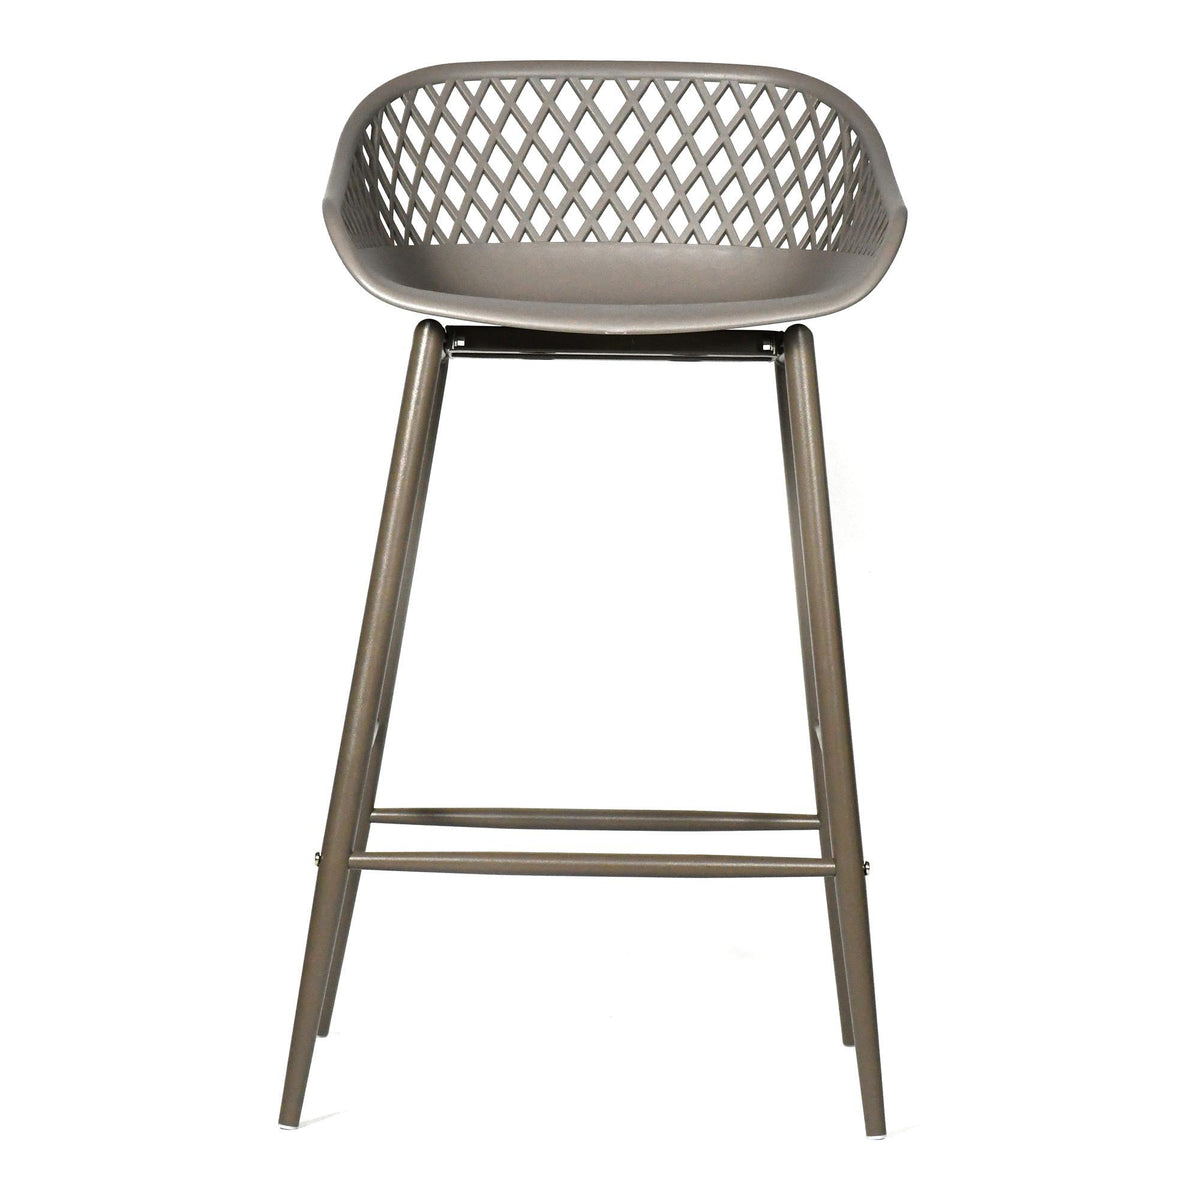 Moe's Home Collection Piazza Outdoor Counter Stool Grey-M2 - QX-1009-15